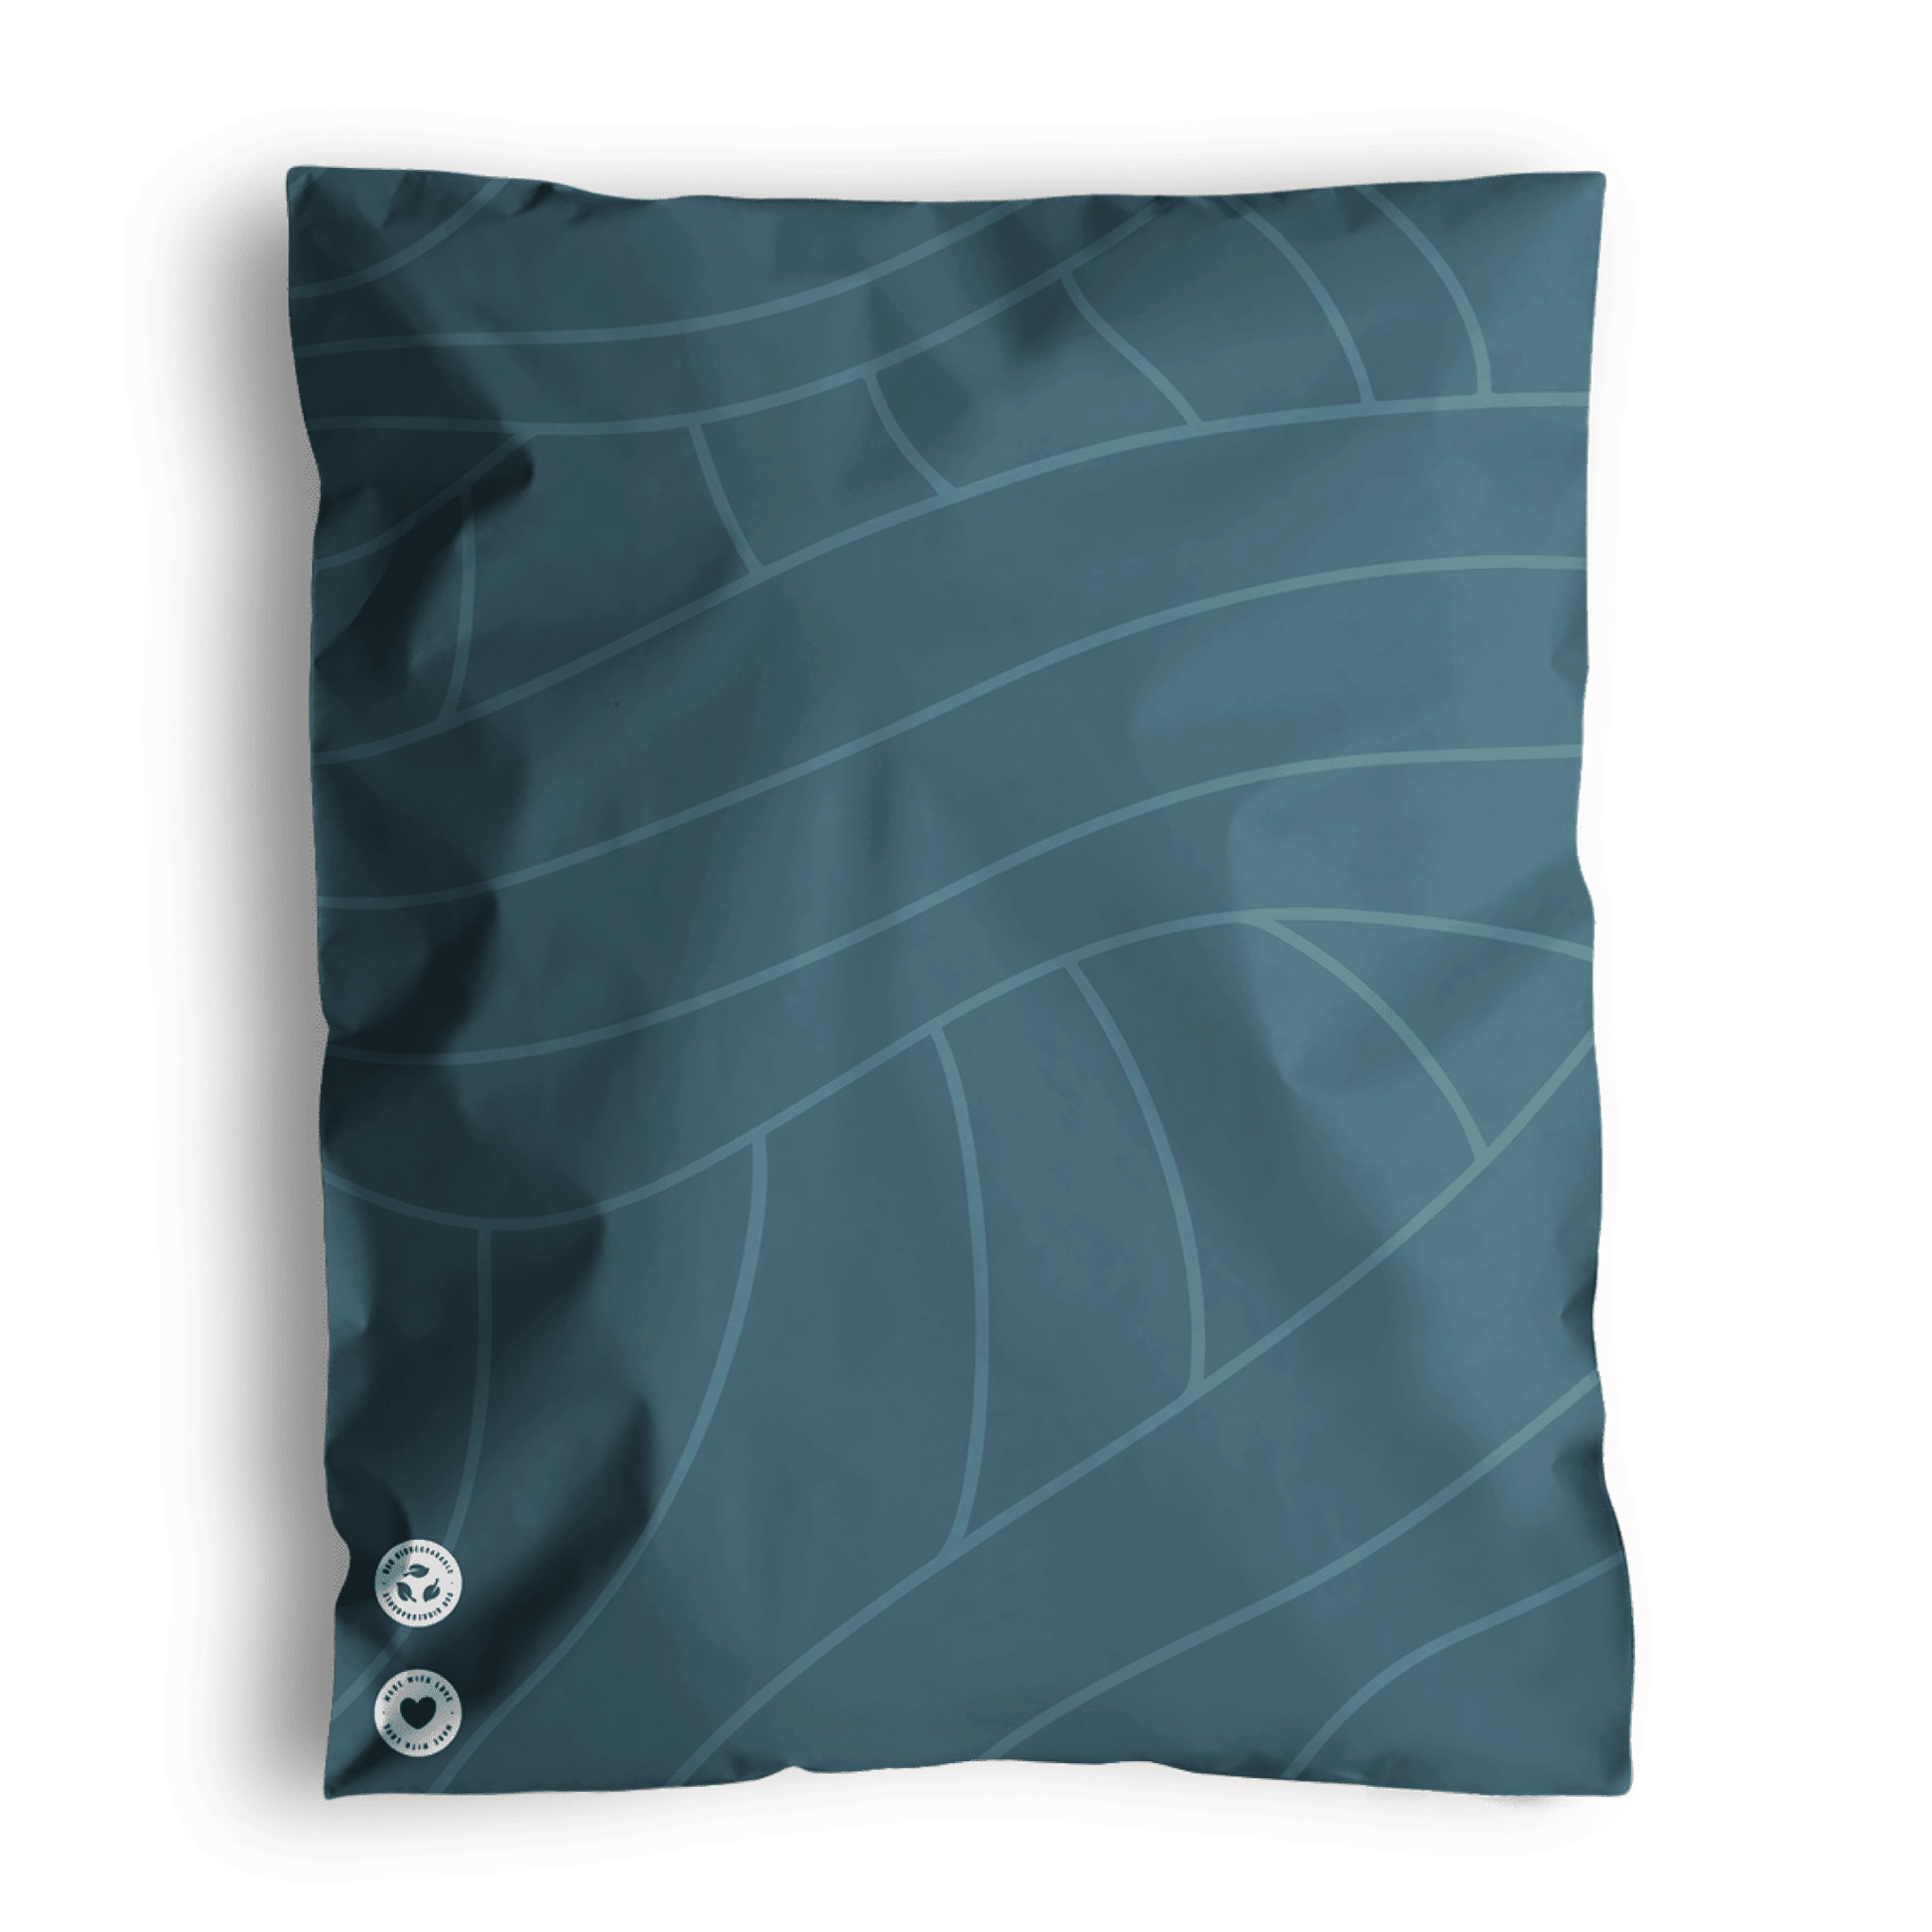 A Space Blue Leaf bed pillow with a leaf pattern design and two decorative buttons, resting on a similarly patterned impack.co recyclable surface.